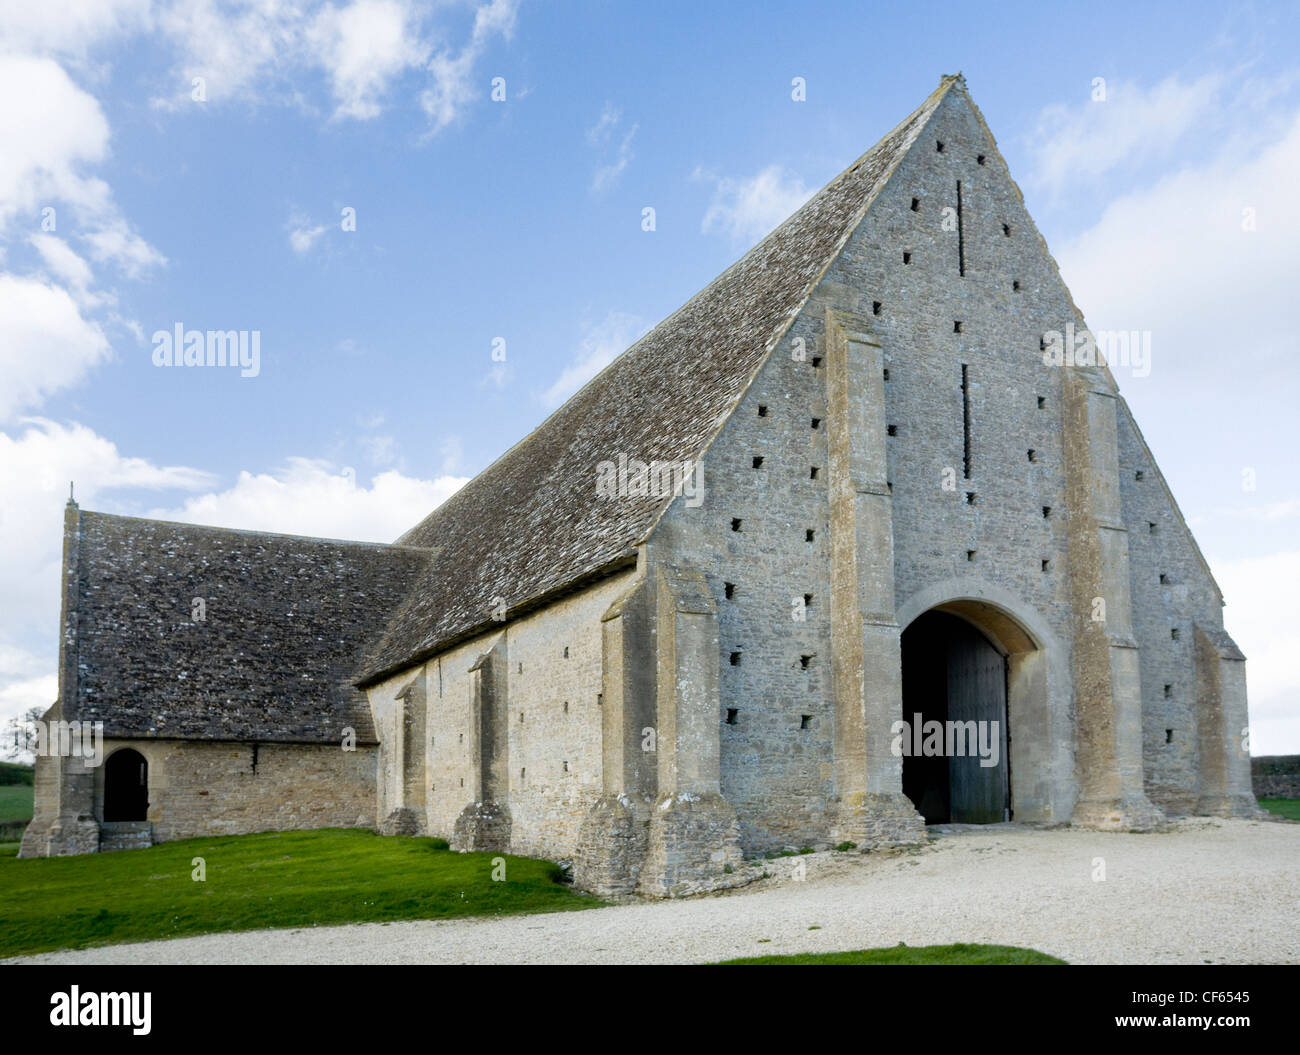 The 14th Century Monastic Tithe Barn at Great Coxwell on the Buscot and Coleshill Estates. Stock Photo